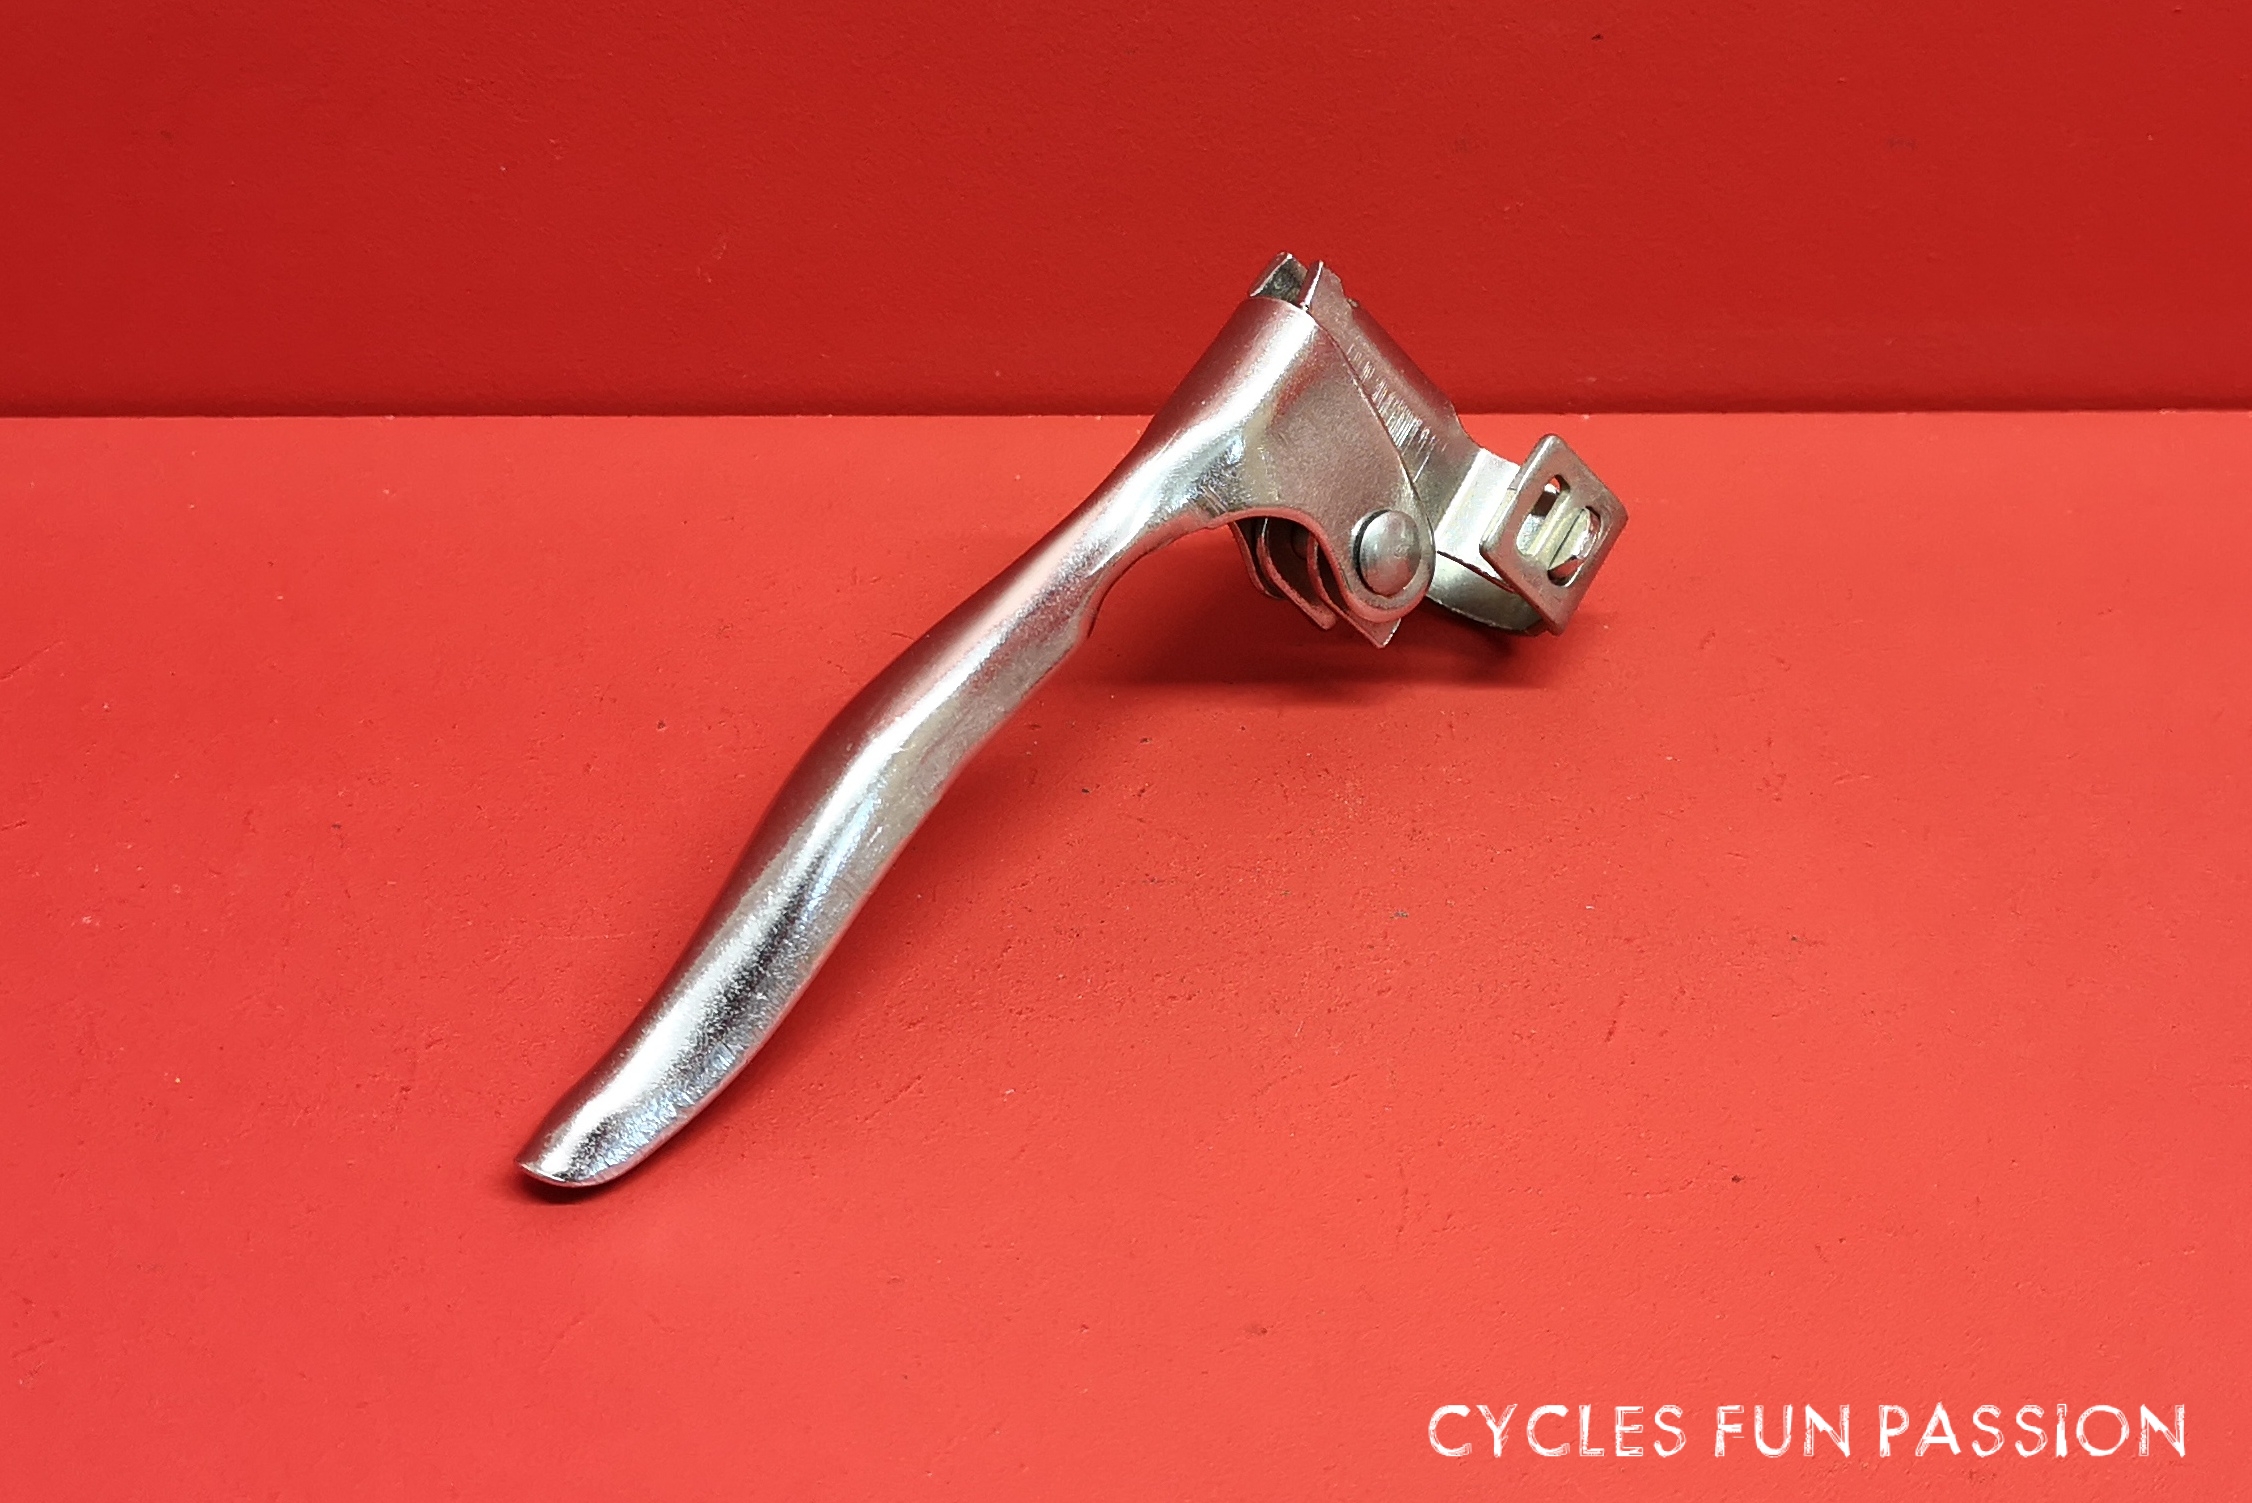 https://cycles-fun-passion.com/wp-content/uploads/2021/01/Levier-frein-Brake-Lever-vintage-road-bike-velo-bicyclette-Randonneuse-course-piece-cycles-fun-passion-ancien-ref90lf.jpg